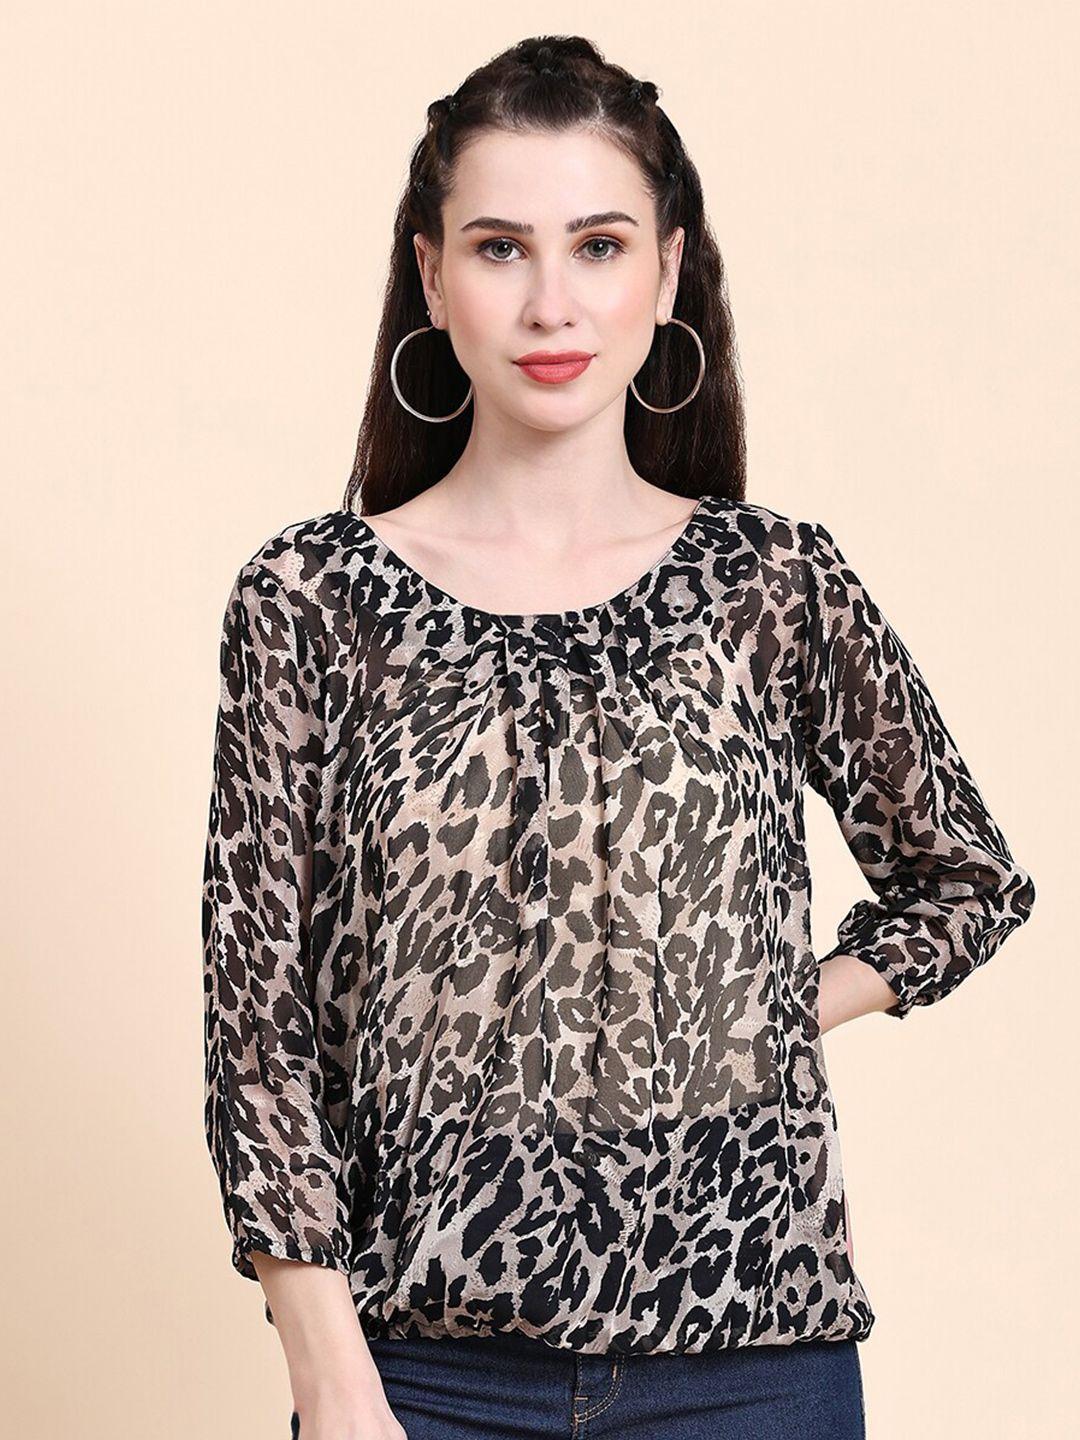 rediscover fashion animal printed pleated blouson top